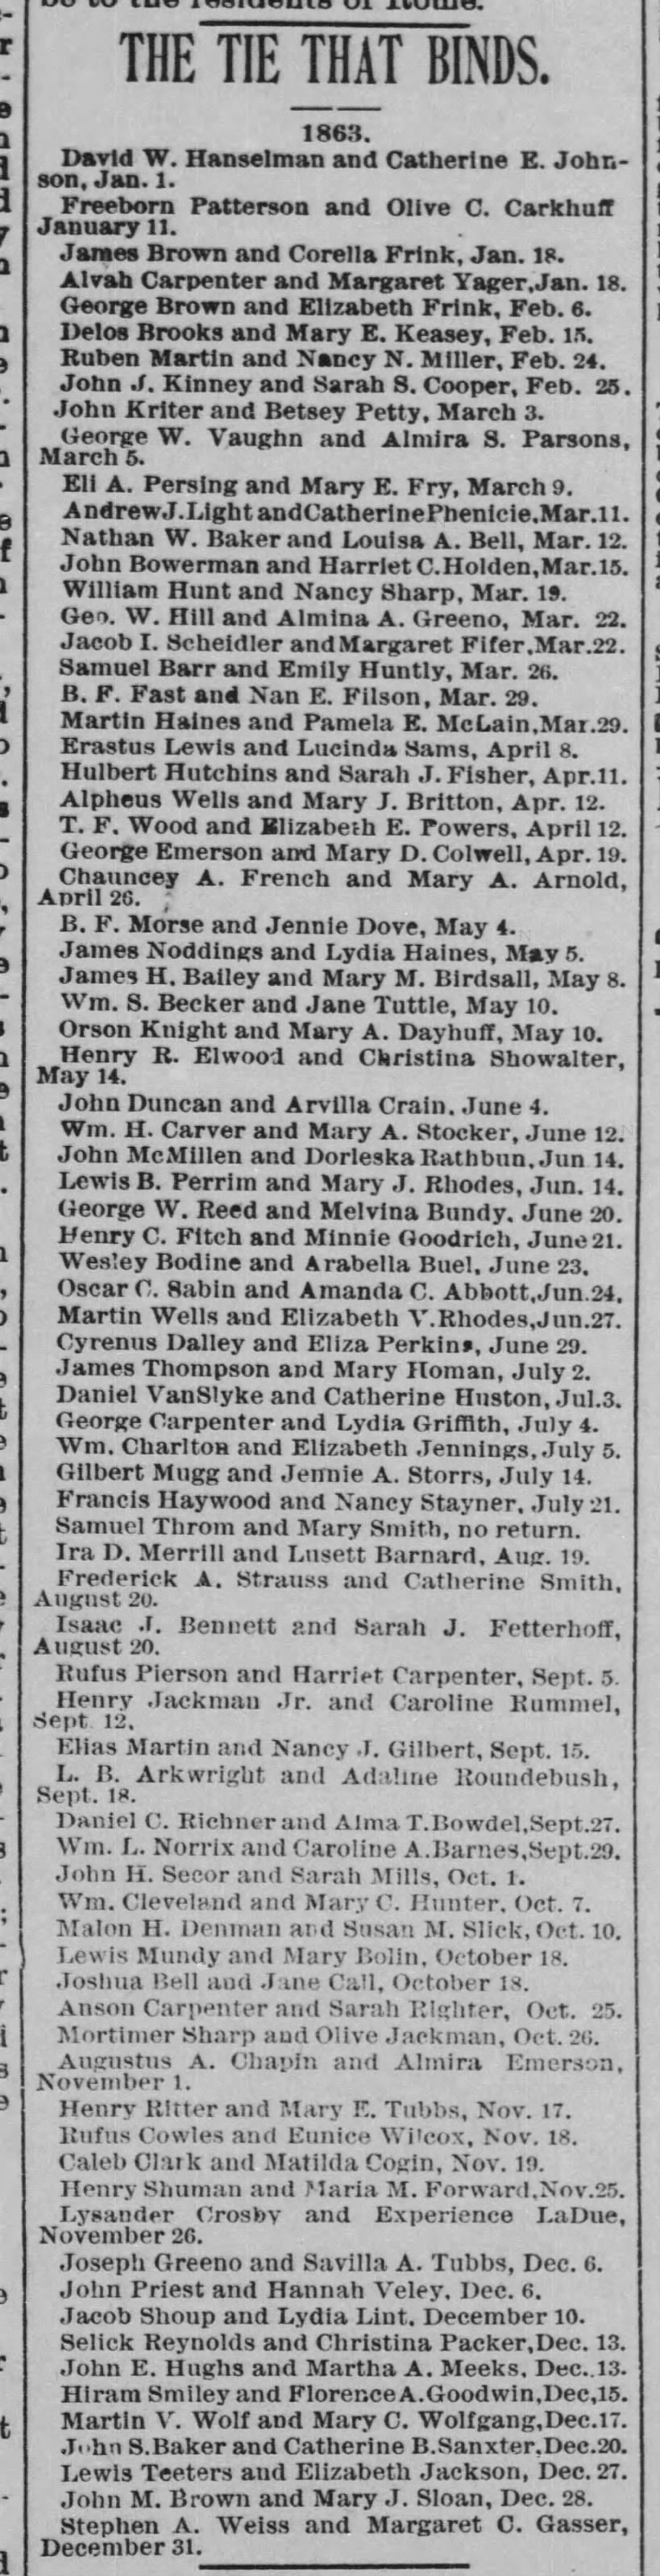 Noddings, James & Lydia Haines married, Steuben Republican, Angola, Indiana Apr 29, 1891 Wed